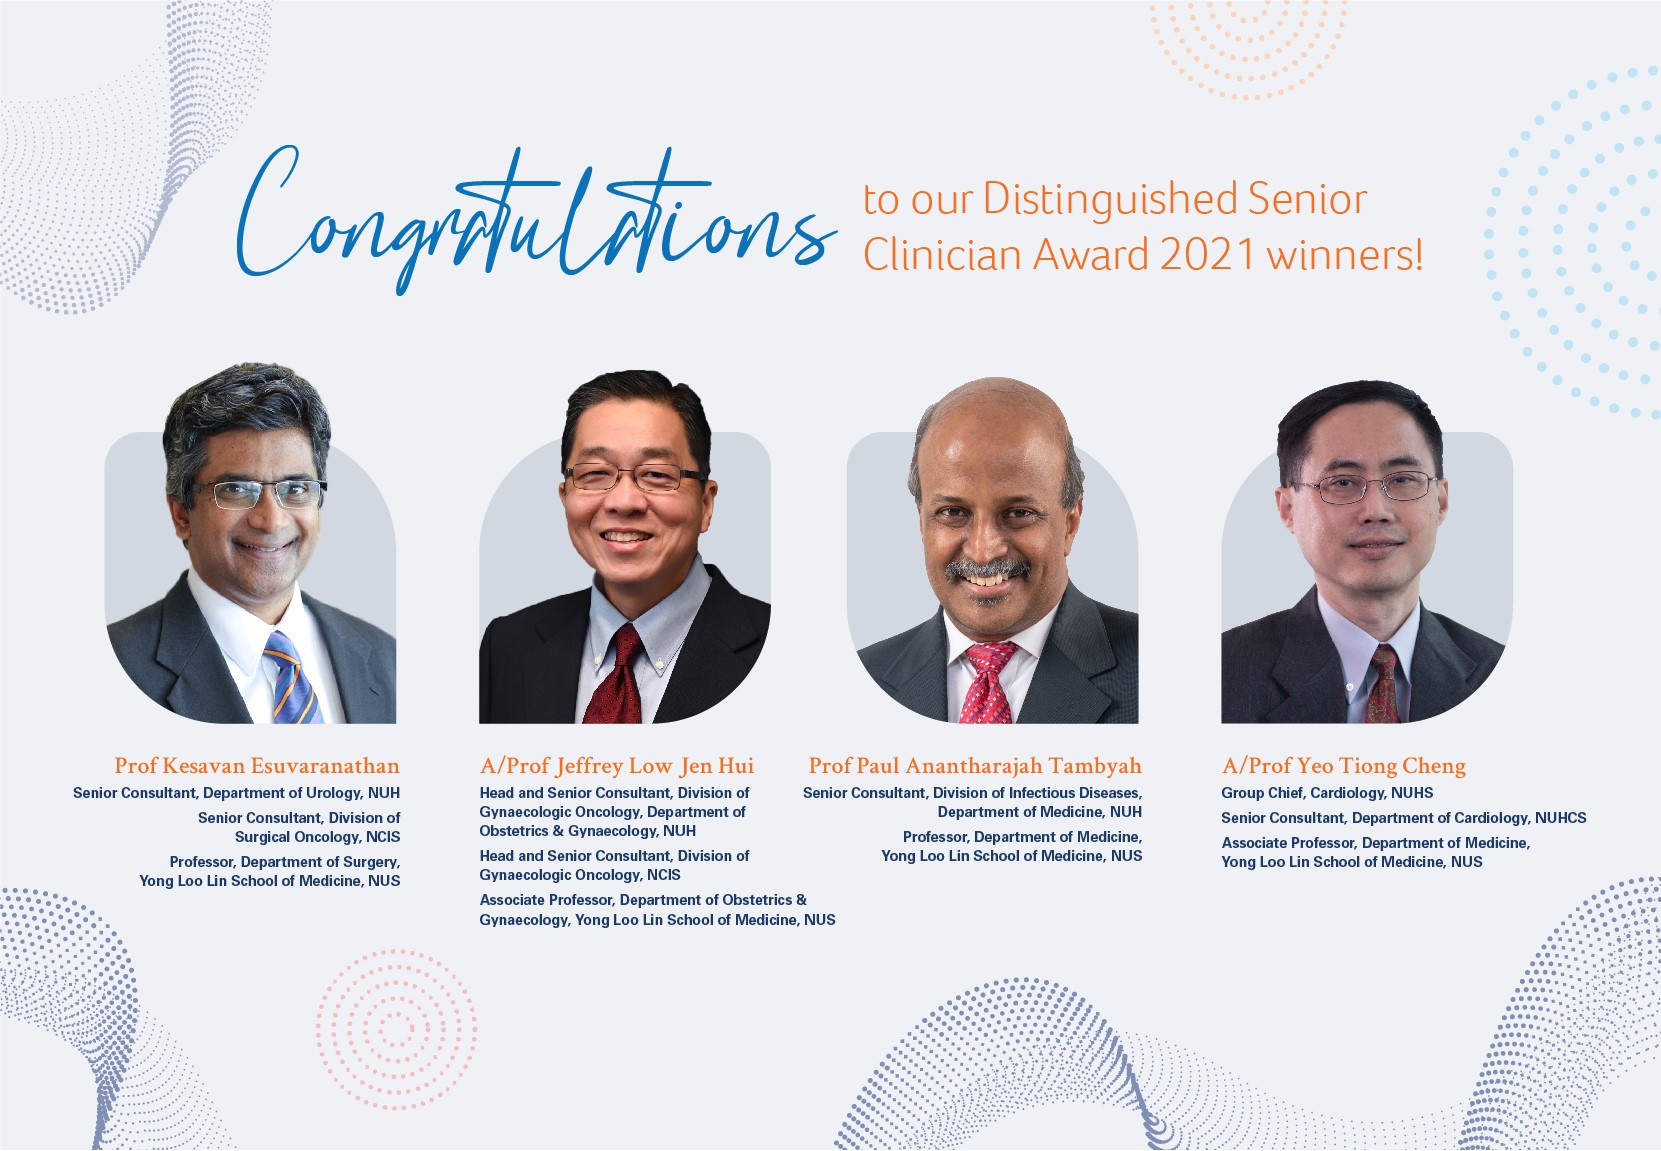 Congratulations to NUHS winners for the Distinguished Senior Clinician Award 2021!